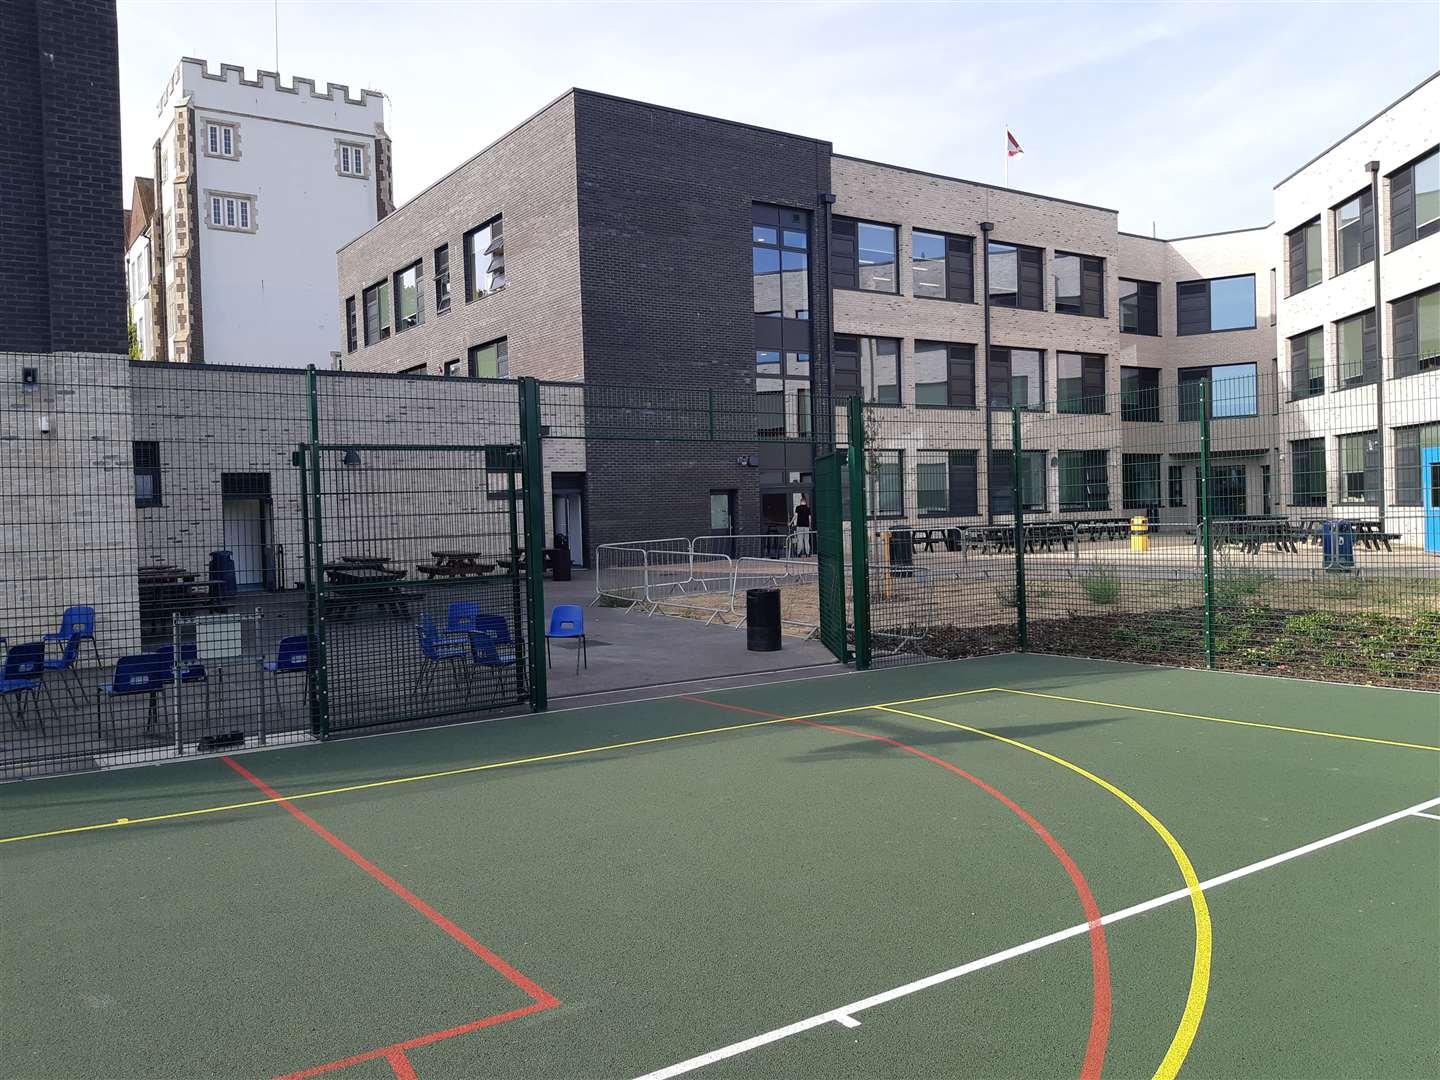 New outdoor sports areas were added as part of the expansion